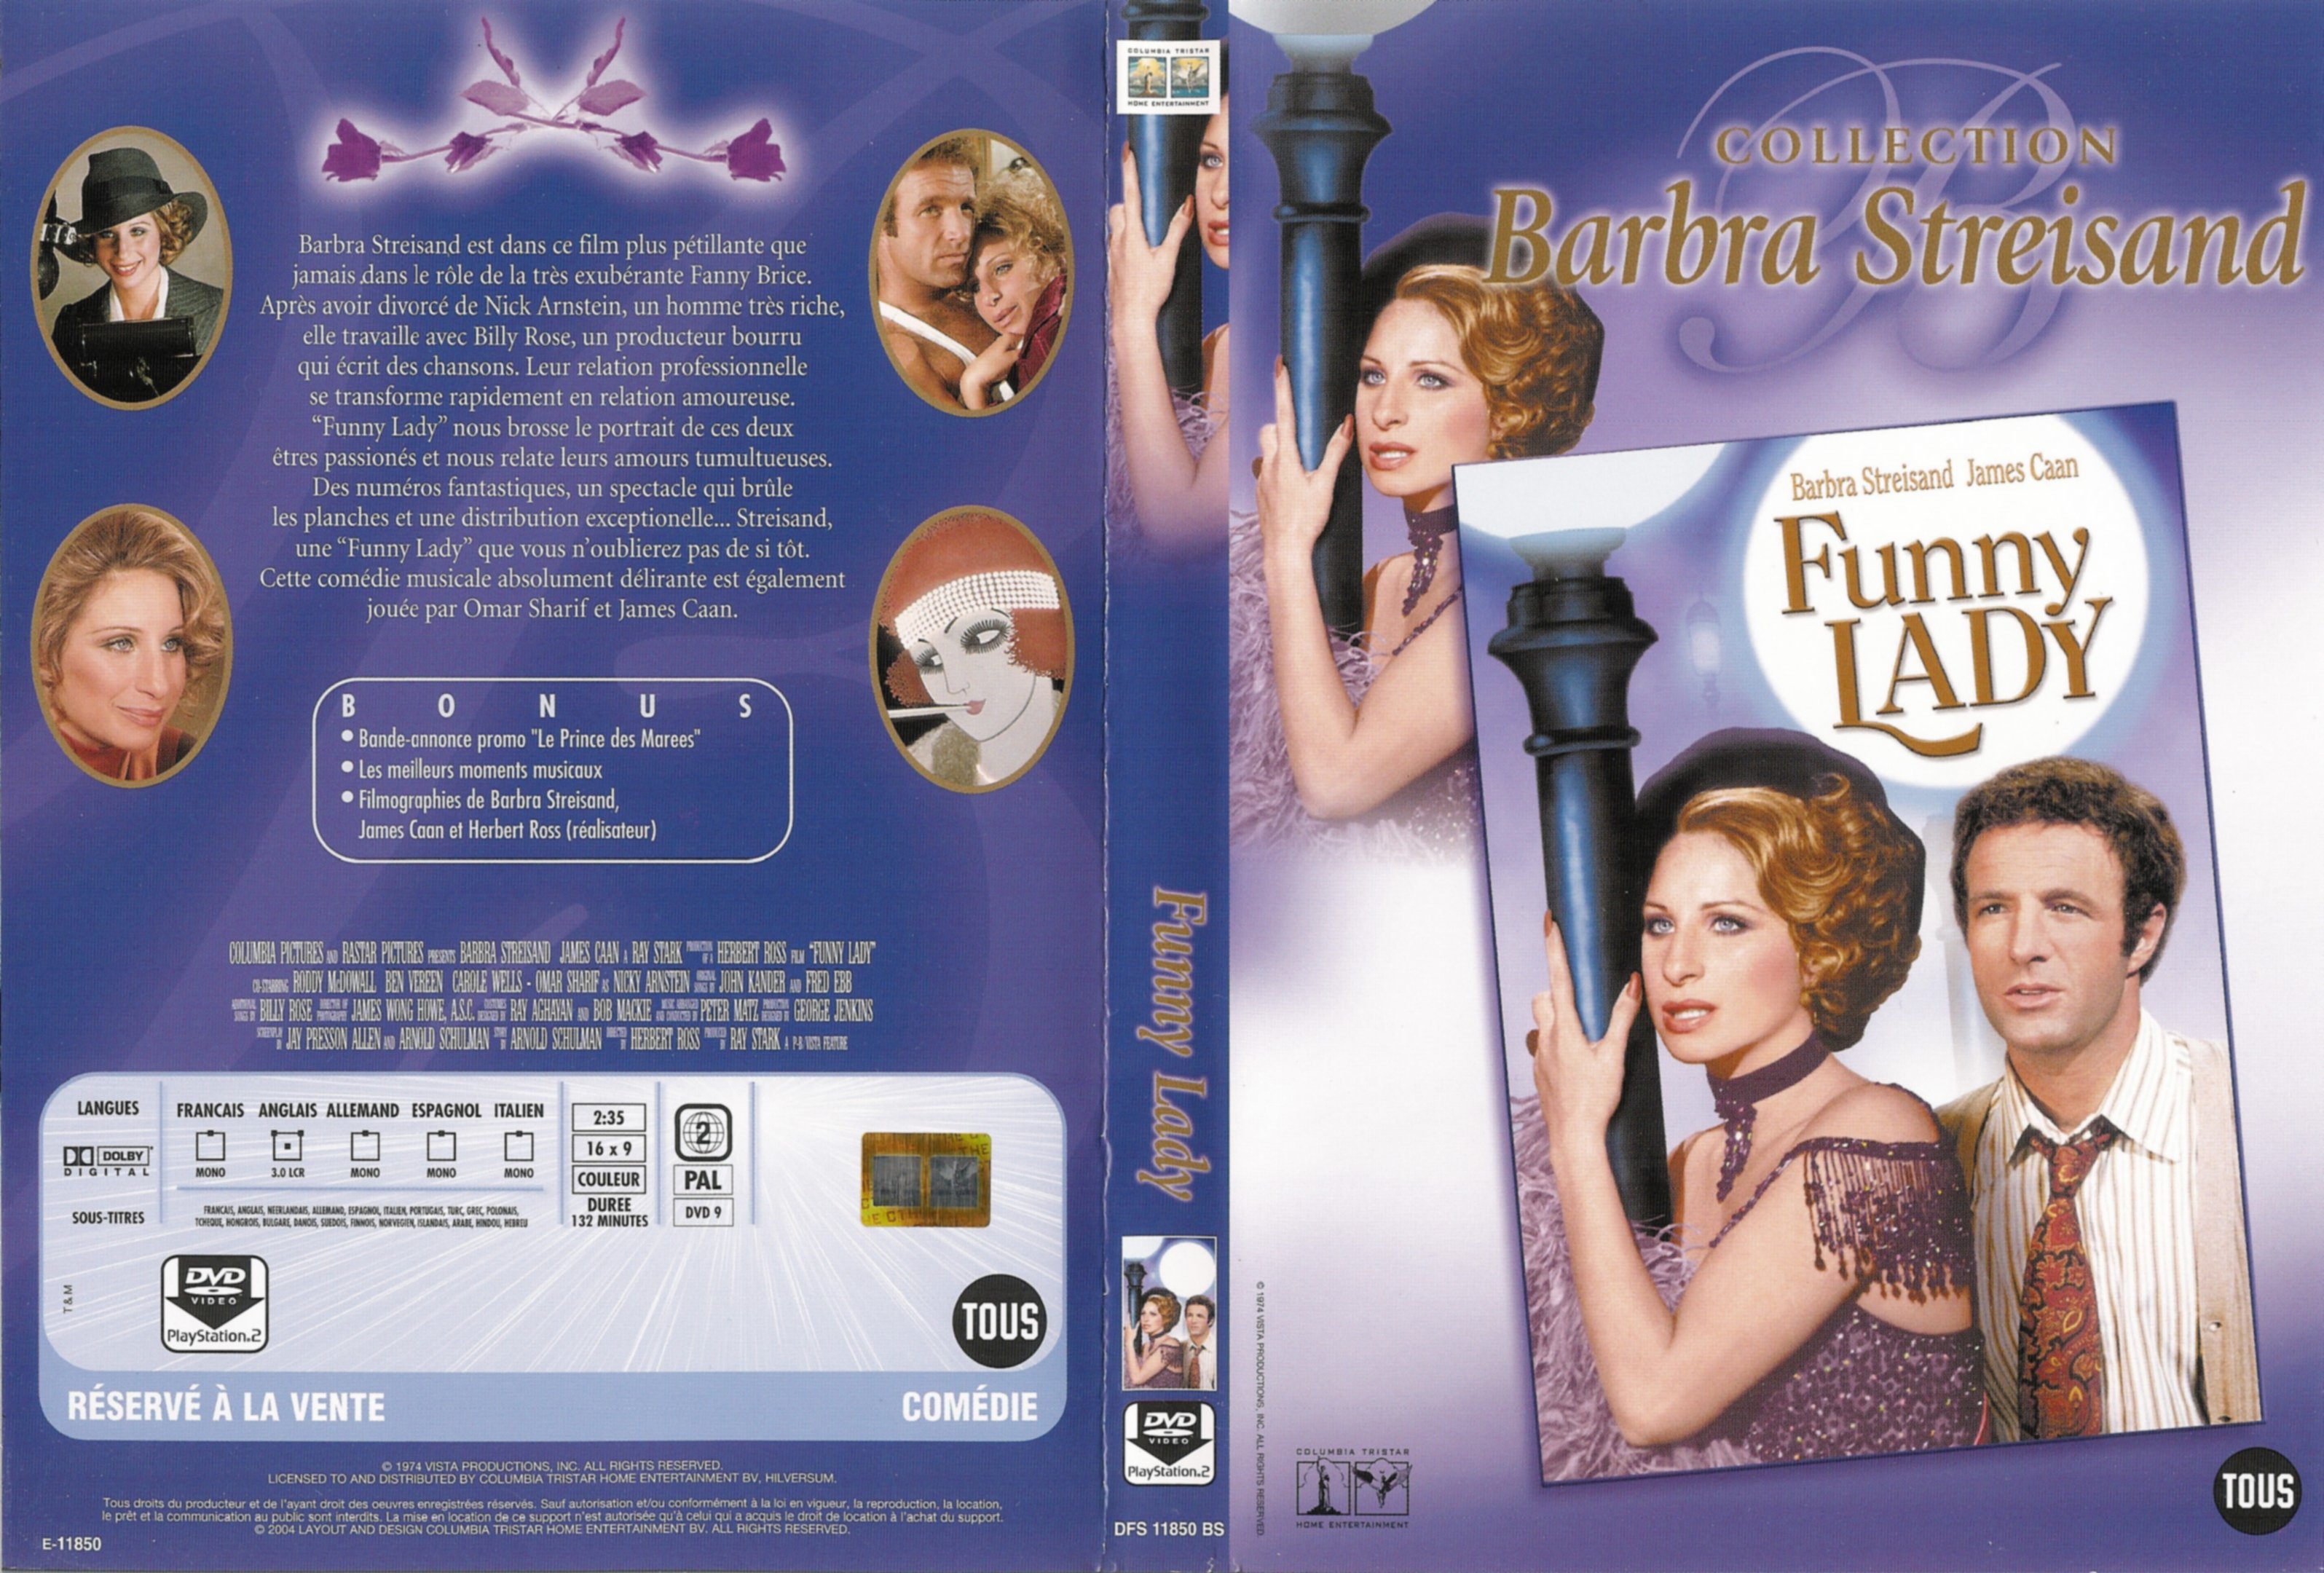 Jaquette DVD Funny lady